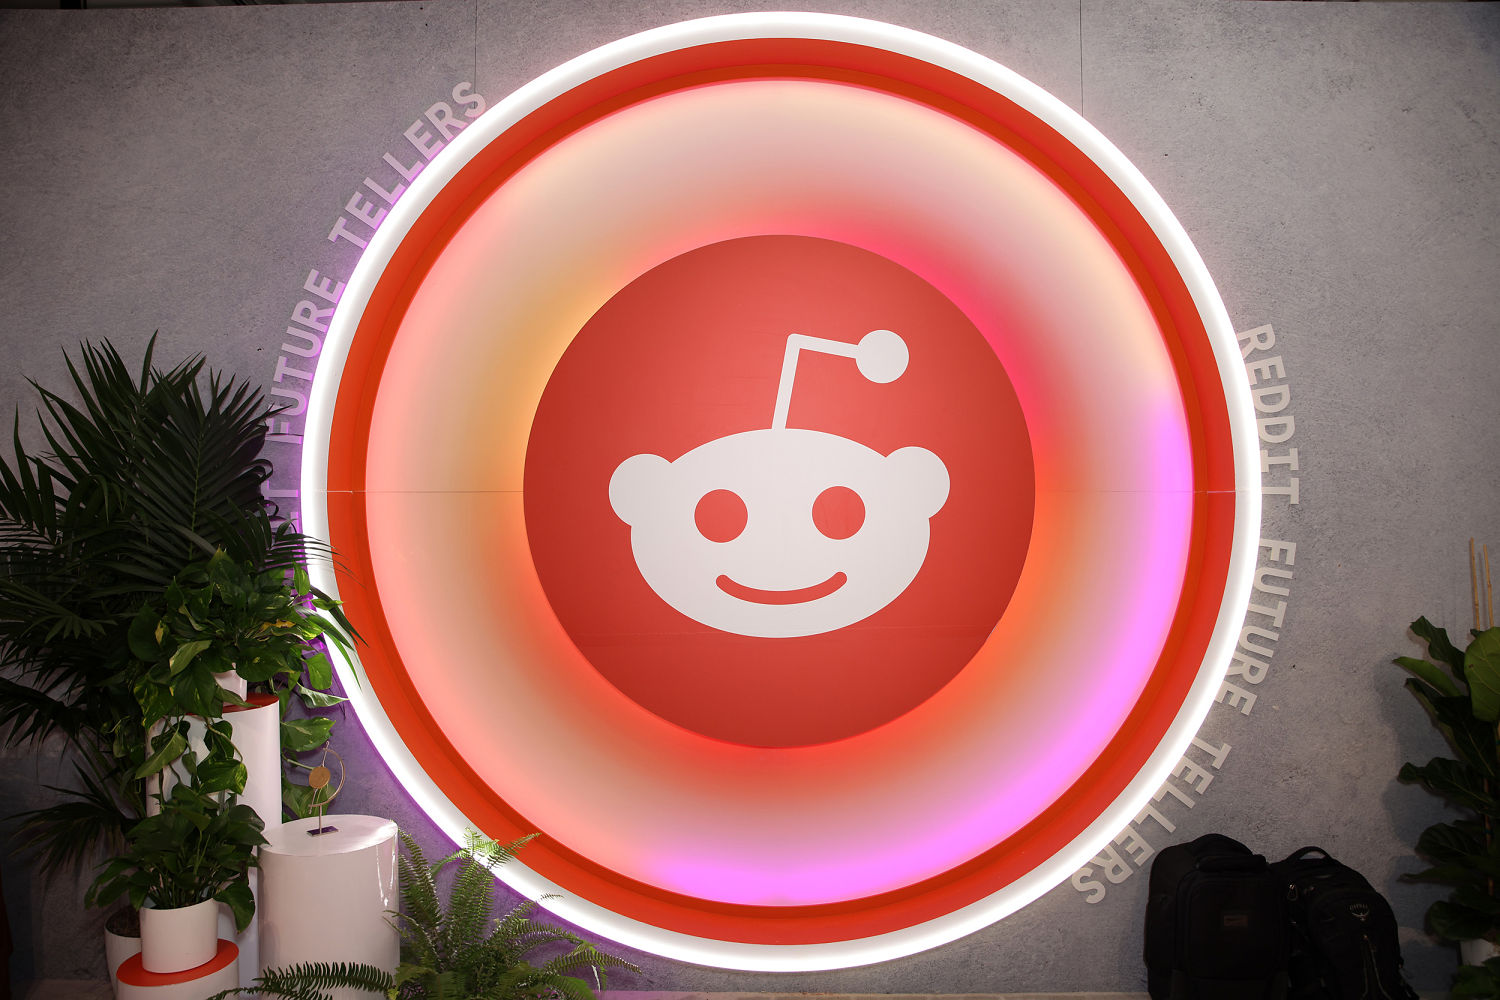 Reddit strikes $60M deal allowing Google to train AI models on its
posts, unveils IPO plans